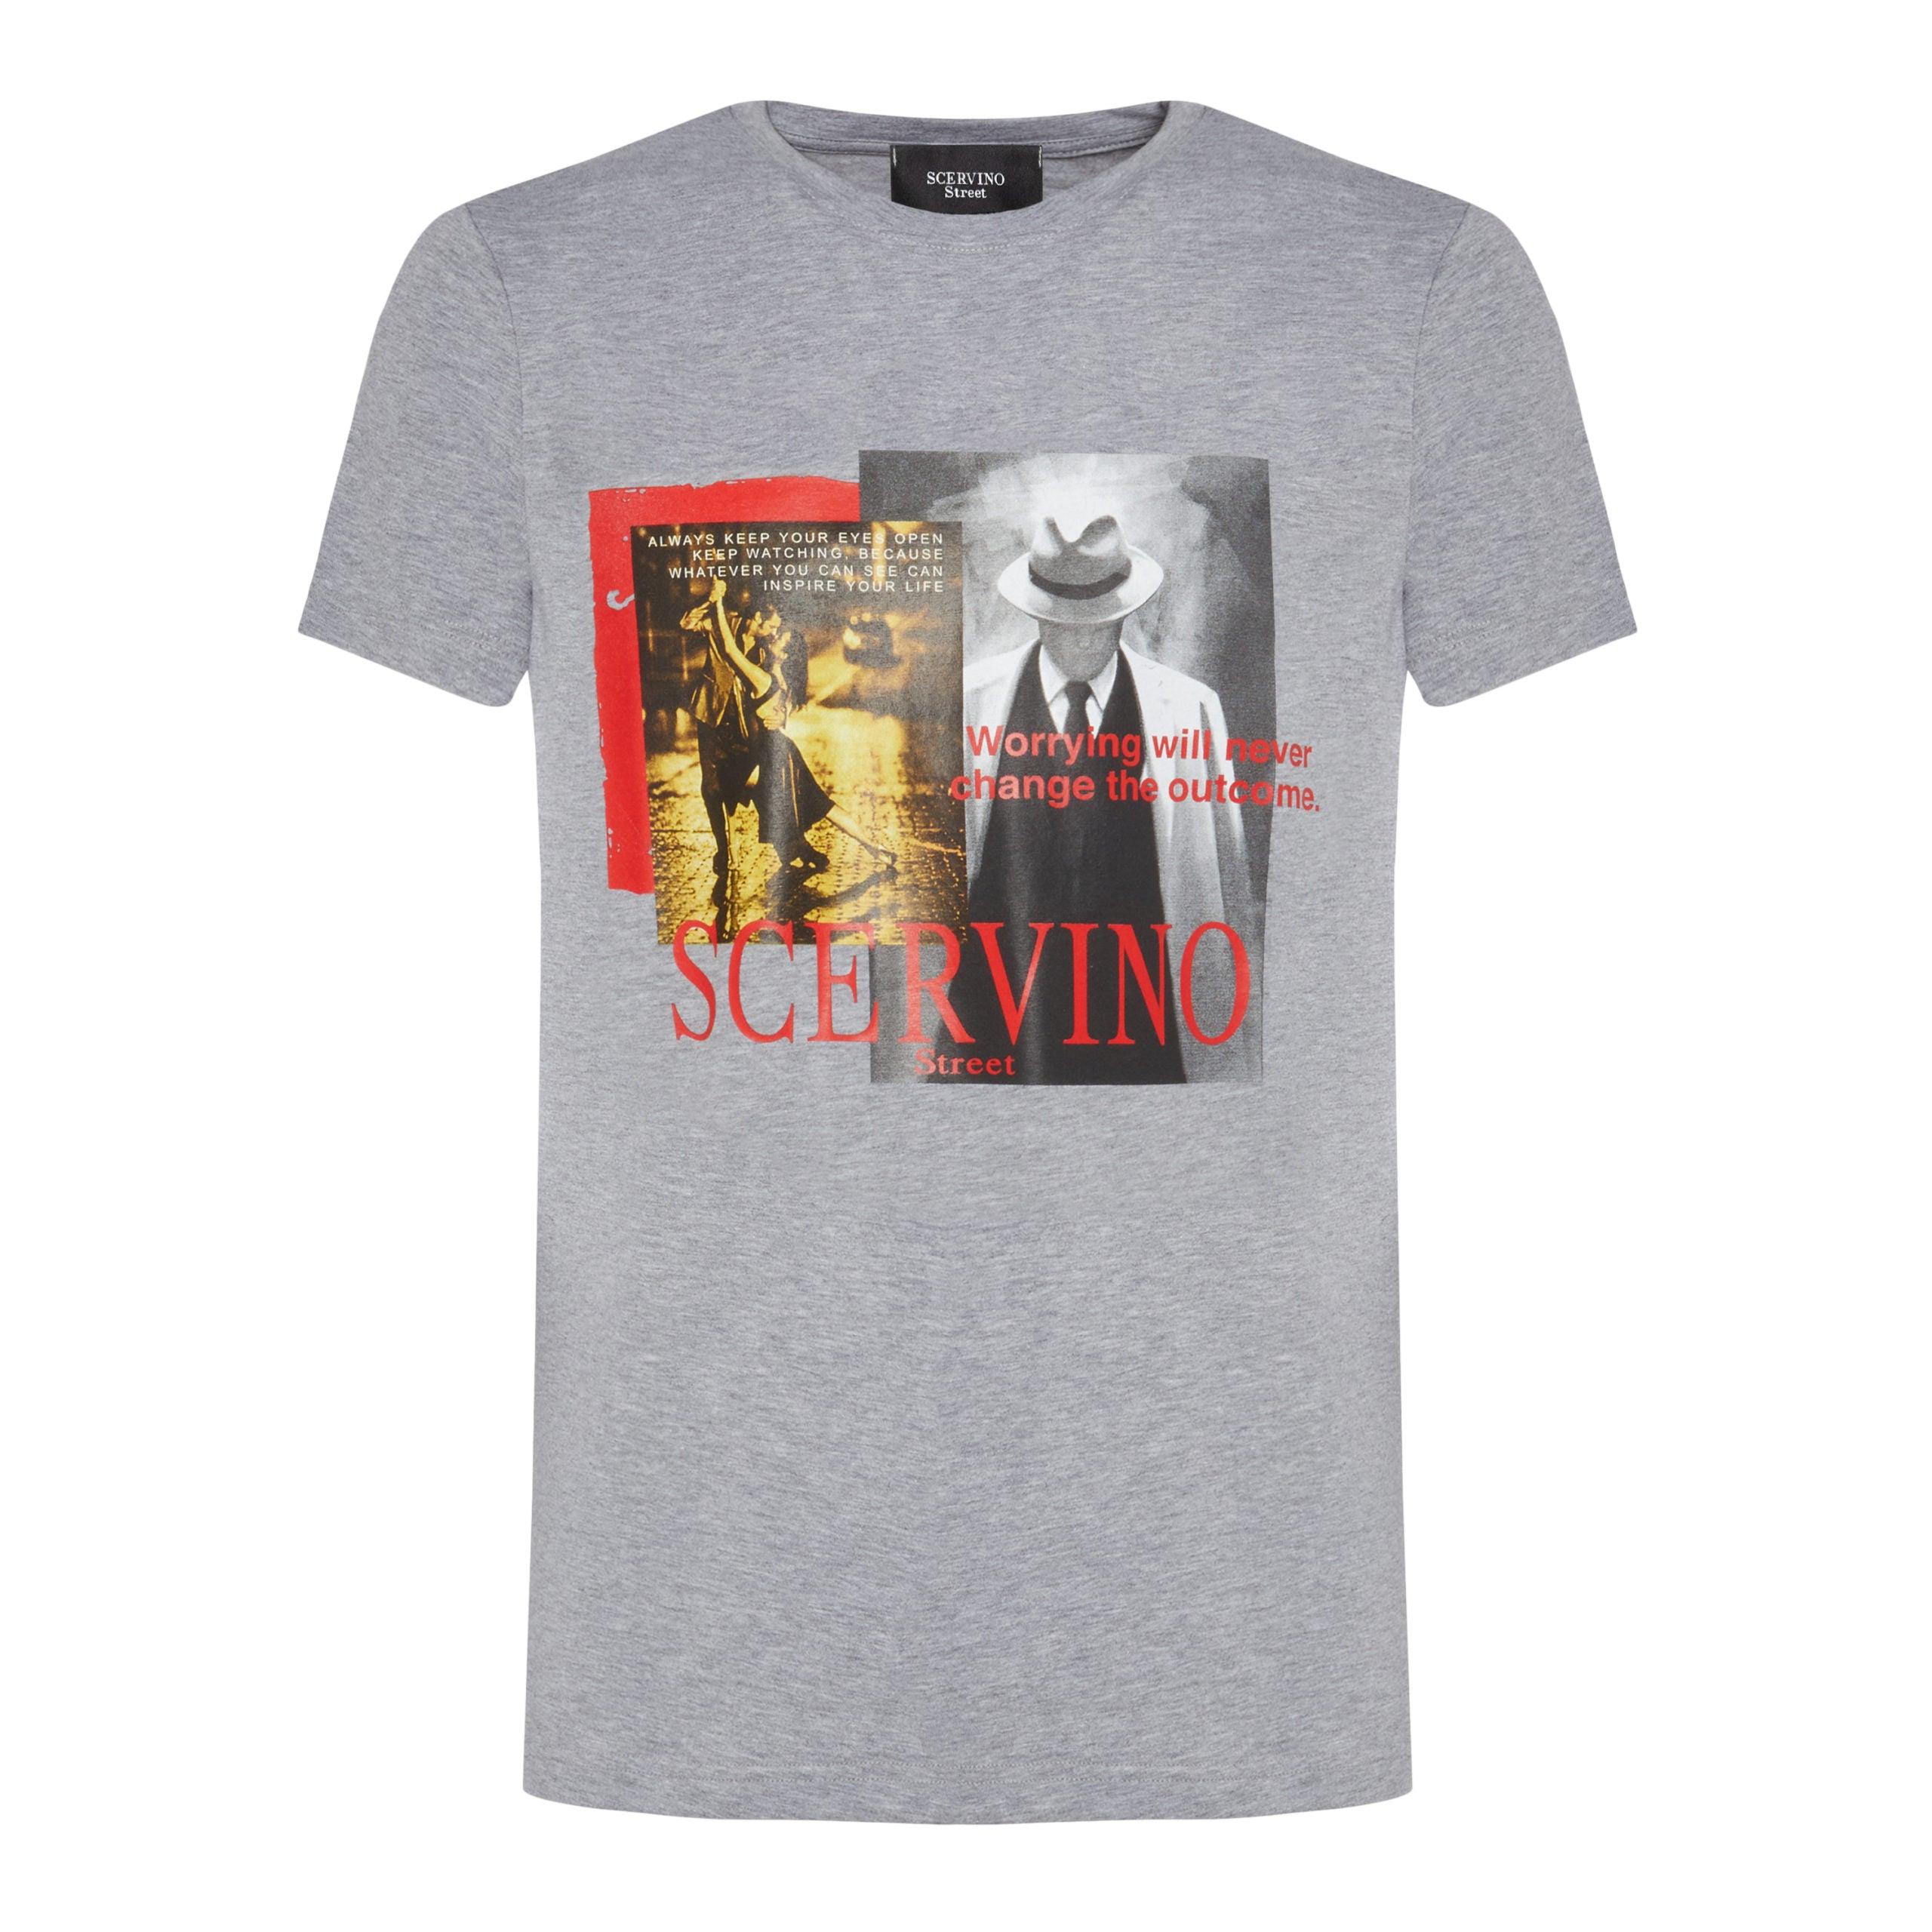 Ermanno Scervino Street Cotton T-shirt in Gray for Men | Lyst